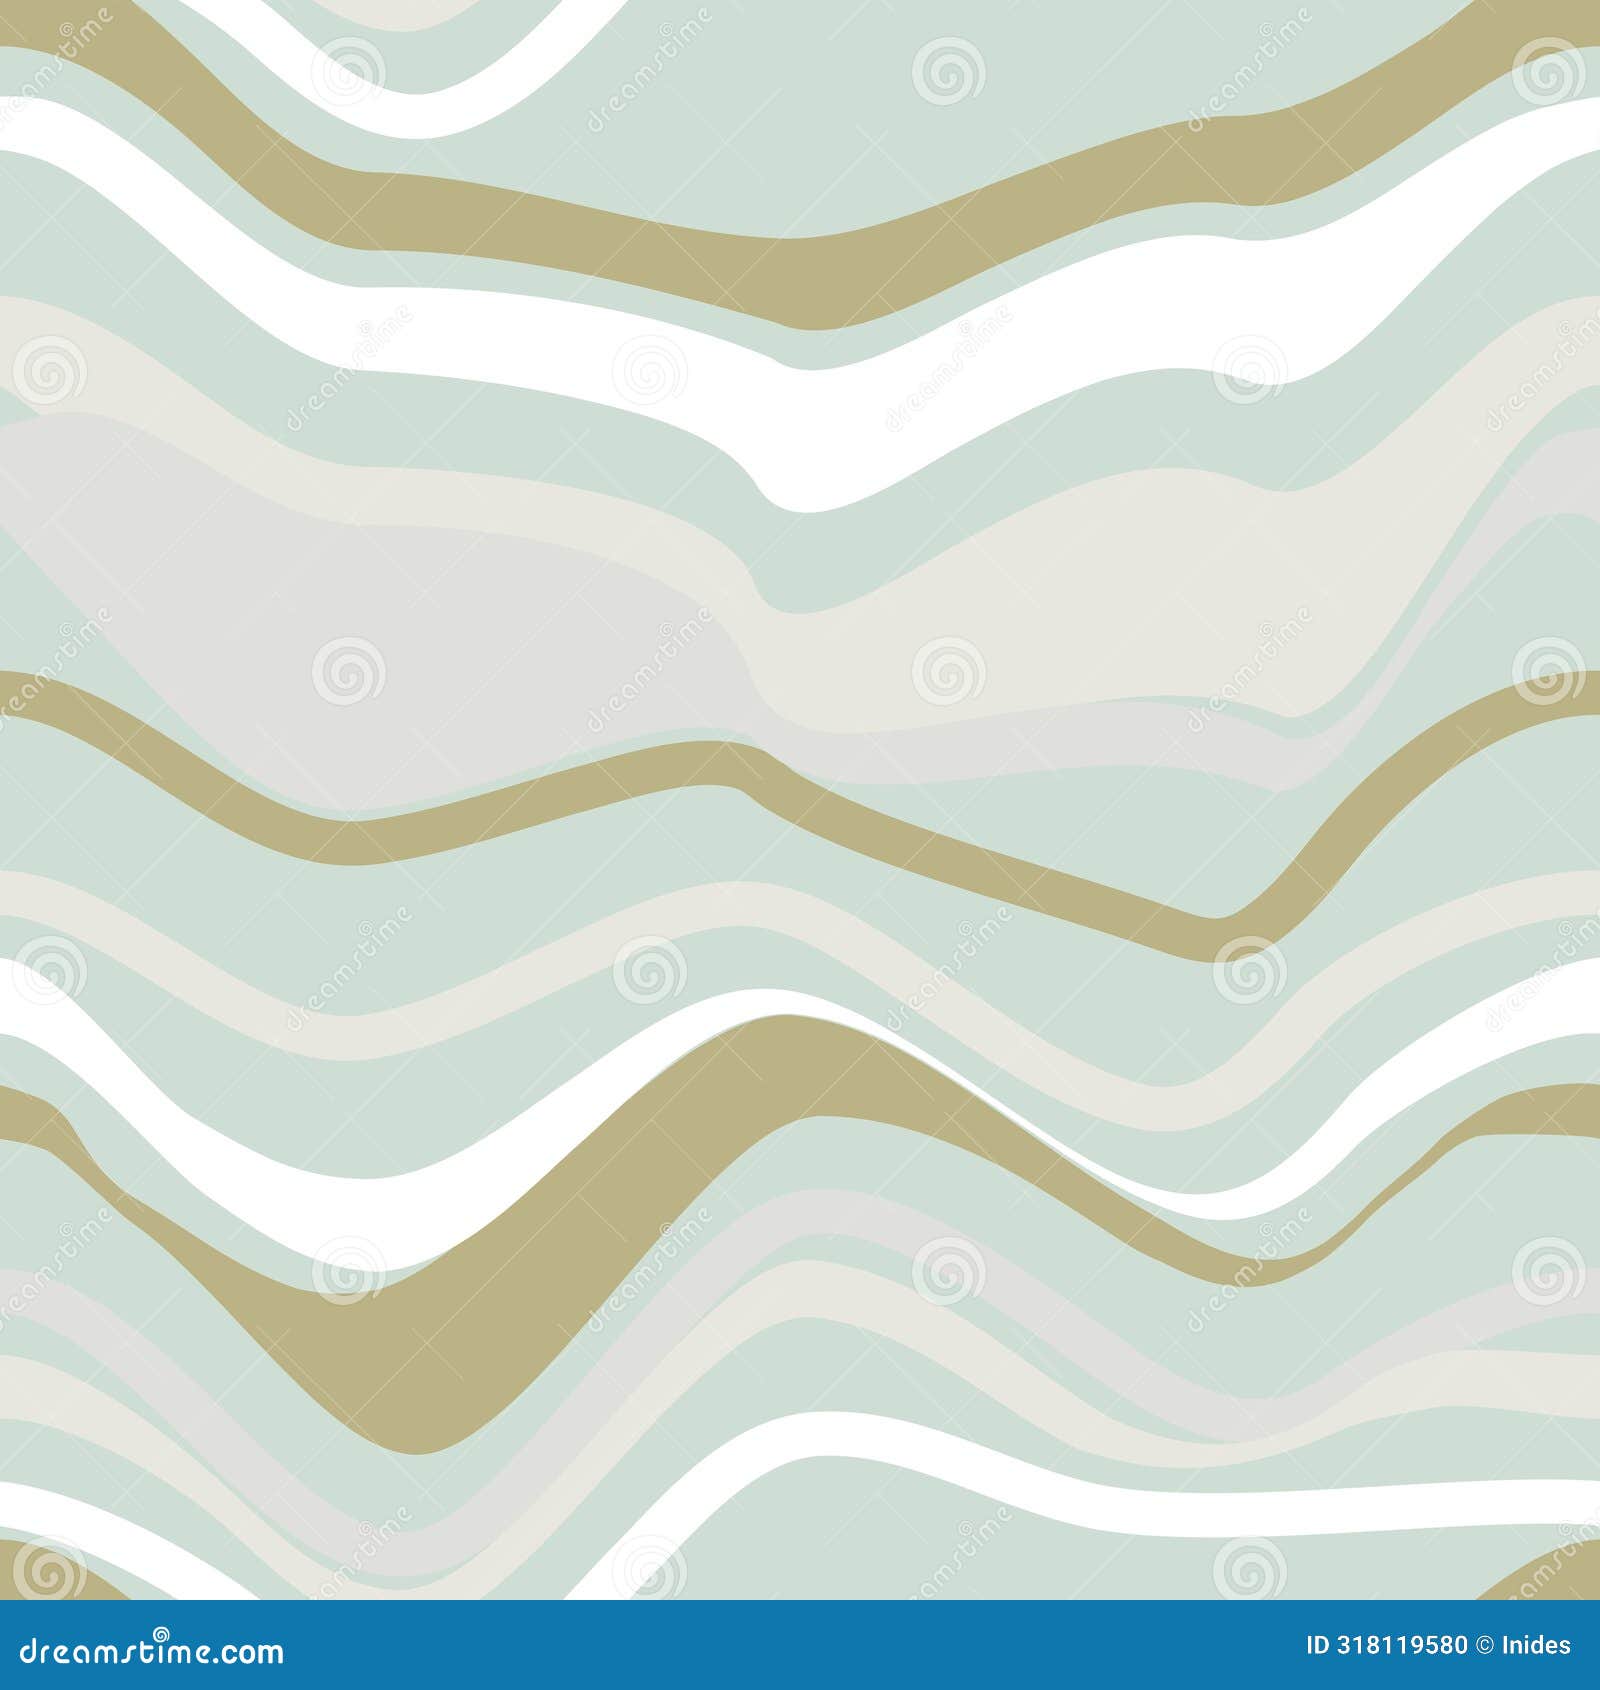 waved lines seamless patterns with variated width strokes green grass and pale color pattern . abstract texture